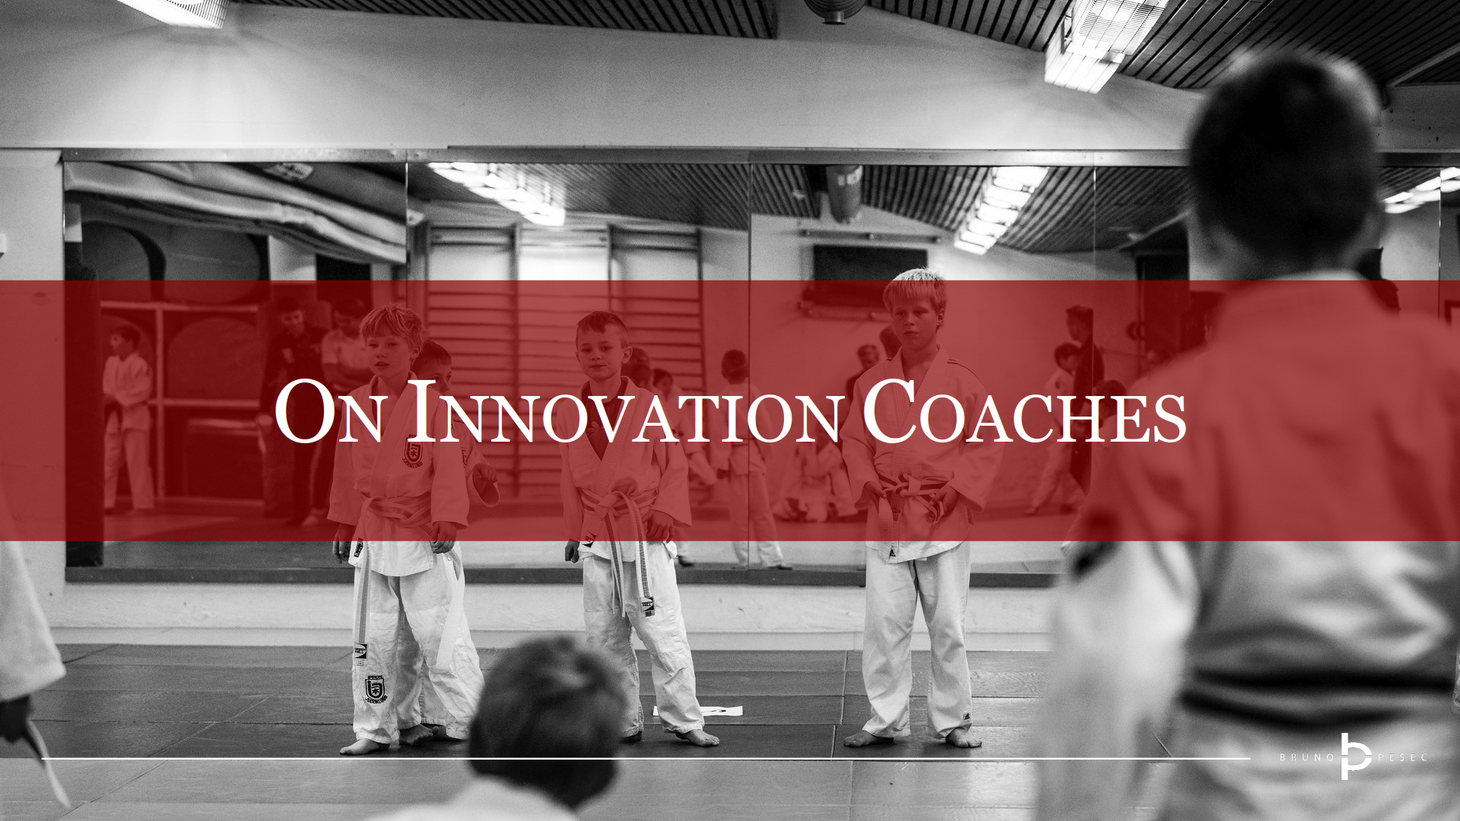 On innovation coaches